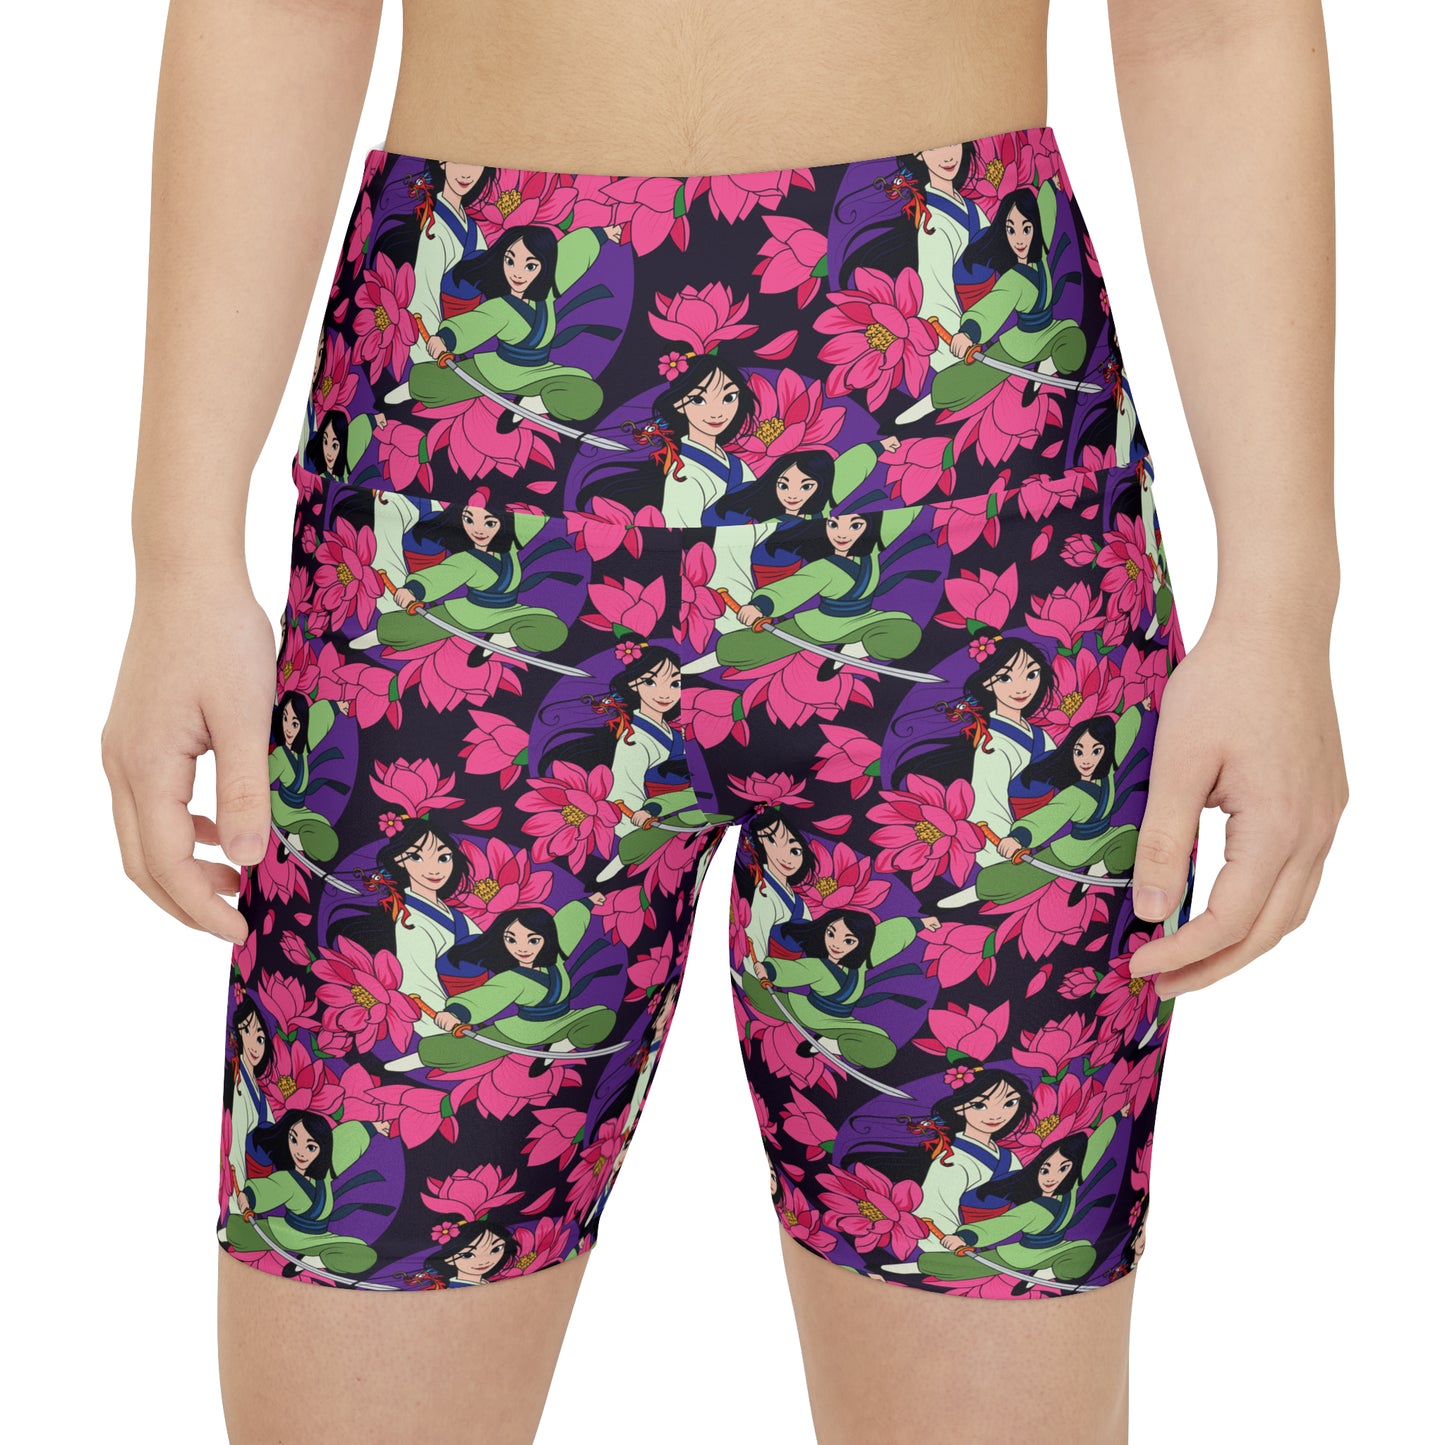 Blooming Flowers Women's Athletic Workout Shorts